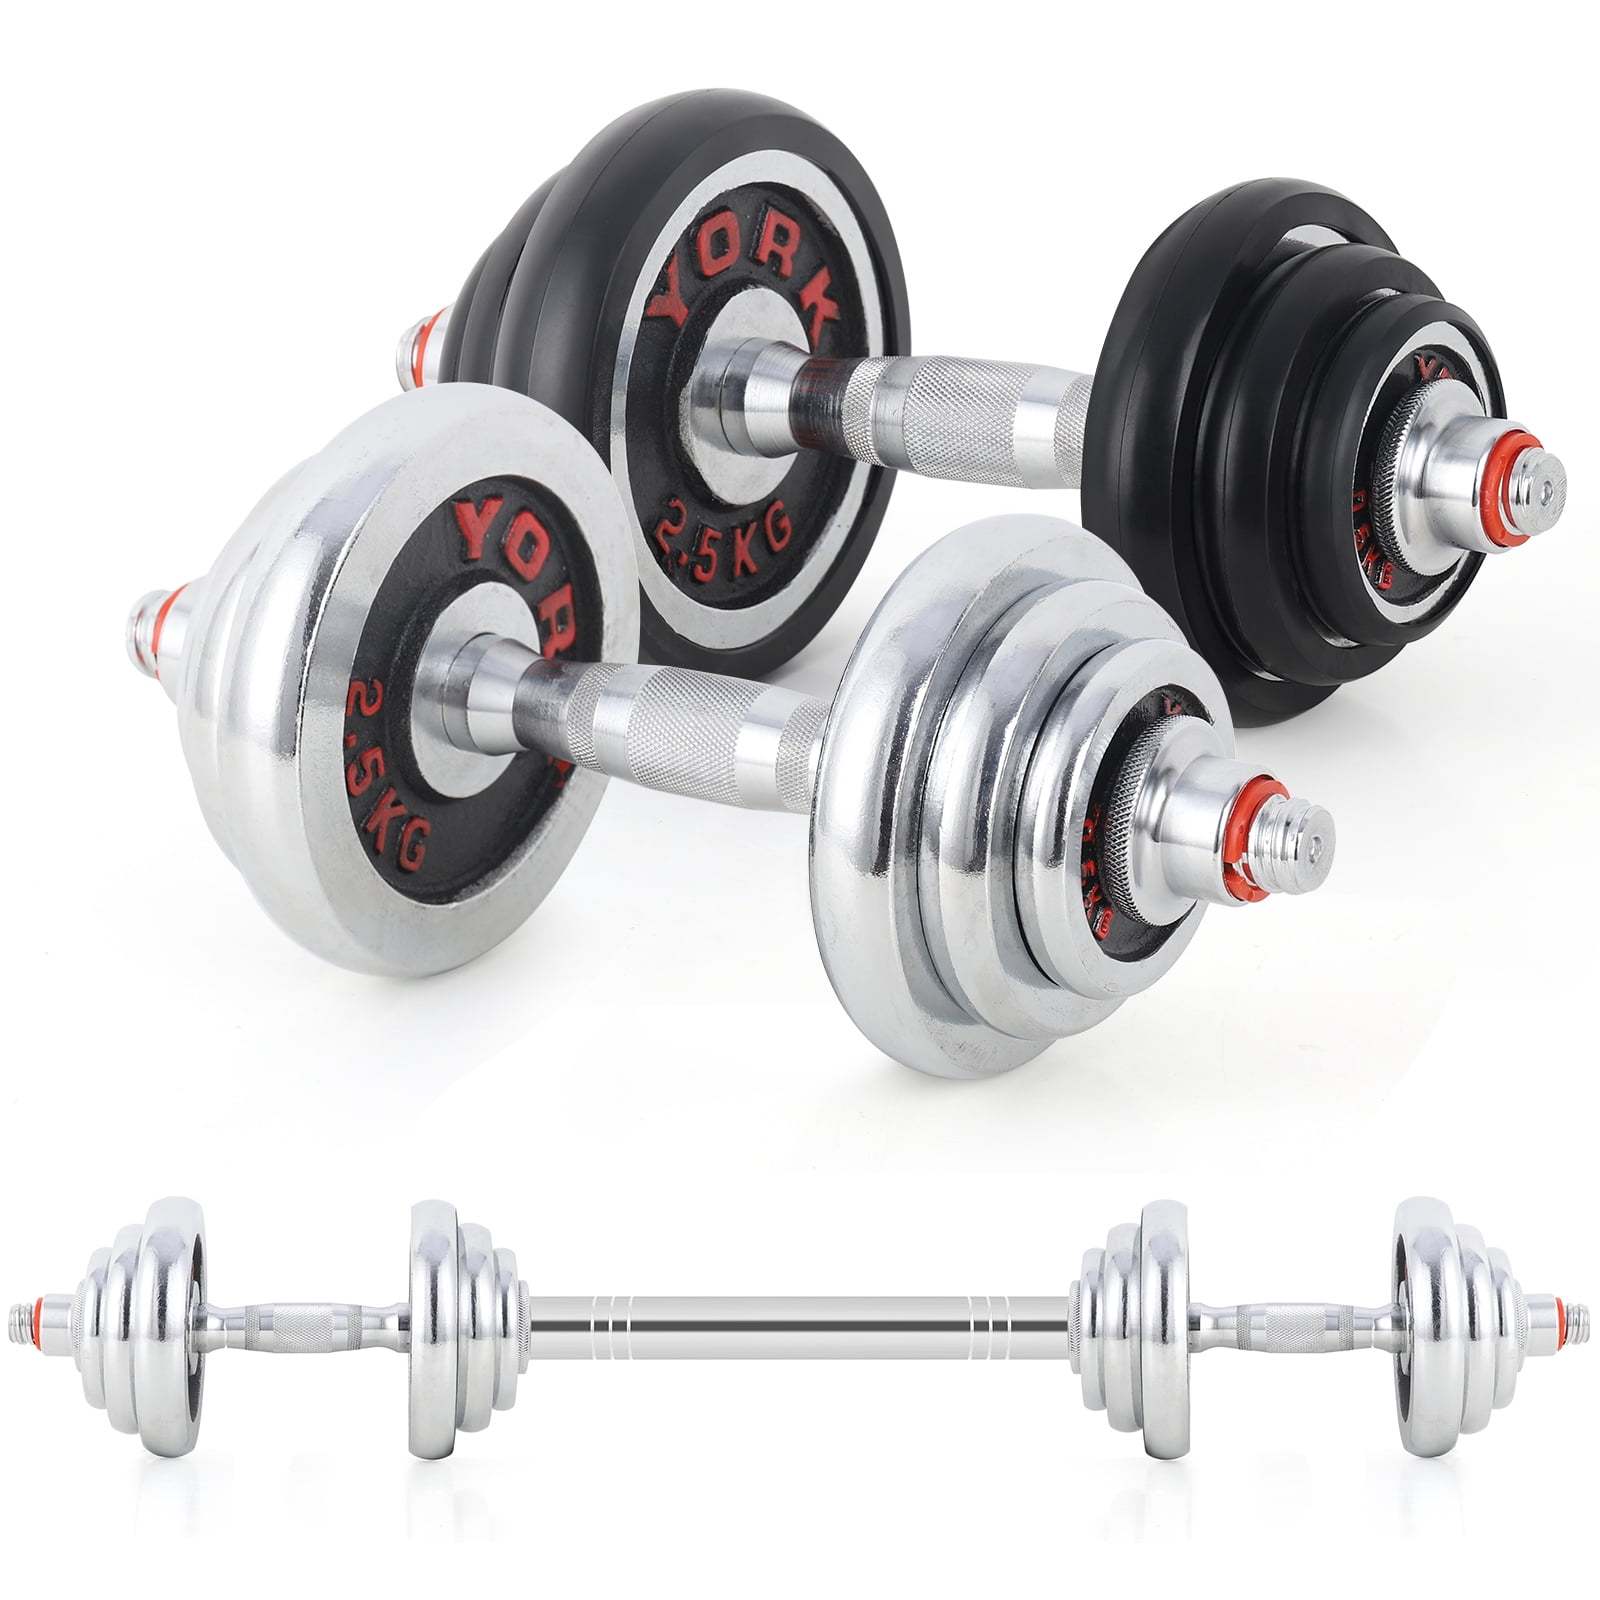 Adjustable Weight to 44Lbs Fitness Equipment for Men & Women Workout Exercise Training with Connecting Rod ZYOMY Dumbbell Barbell Set Dumbbells Weights Set for Home Gym 